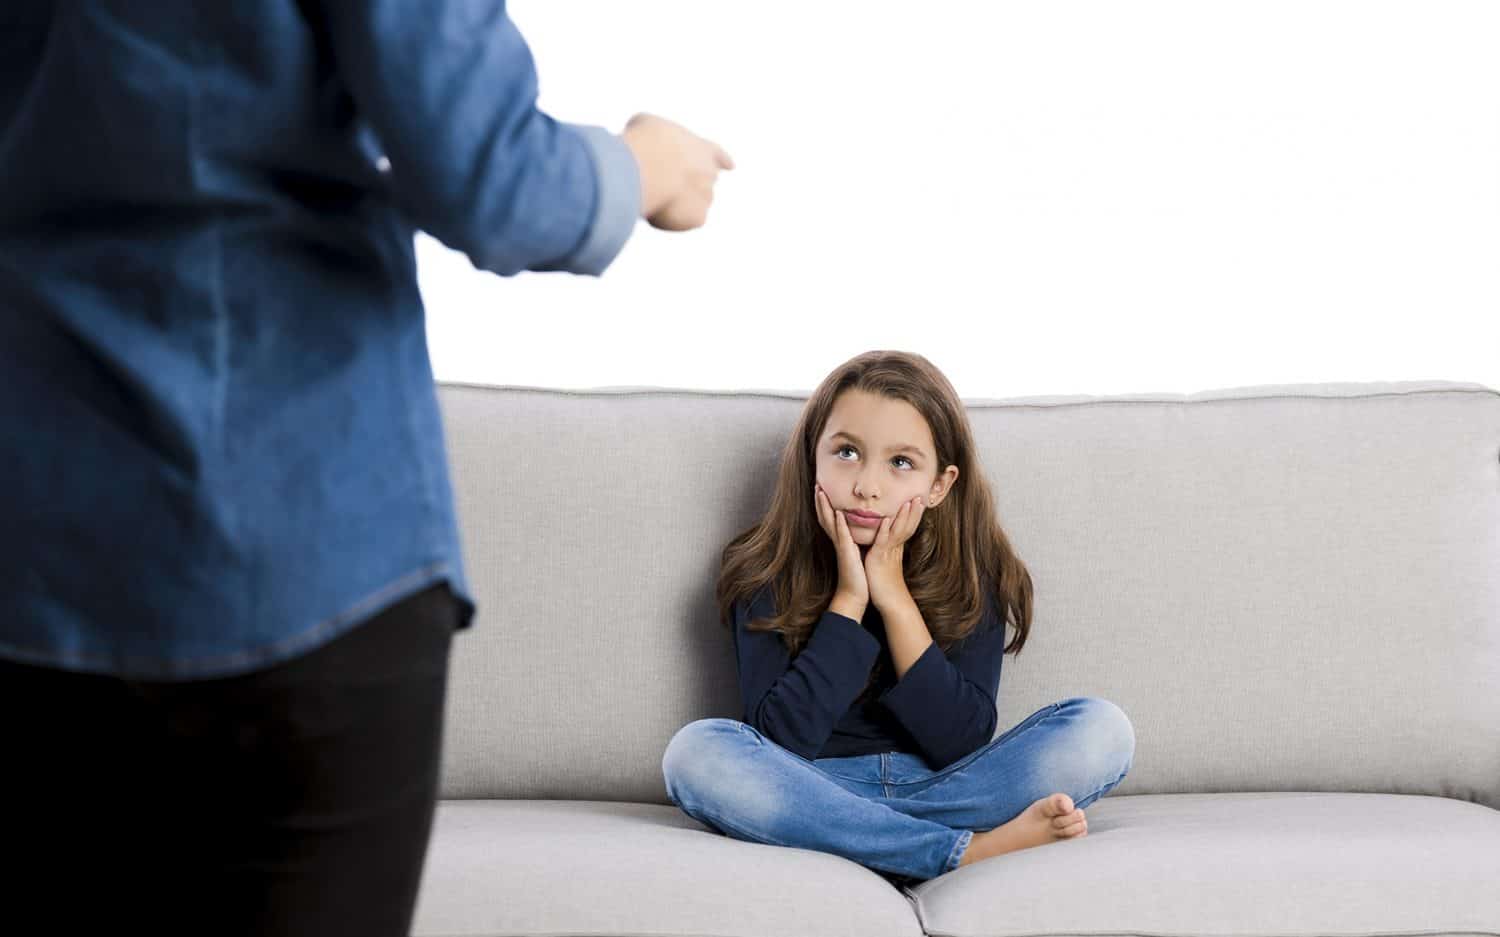 Further Evidence Shows That Spanking Kids Doesn't Work